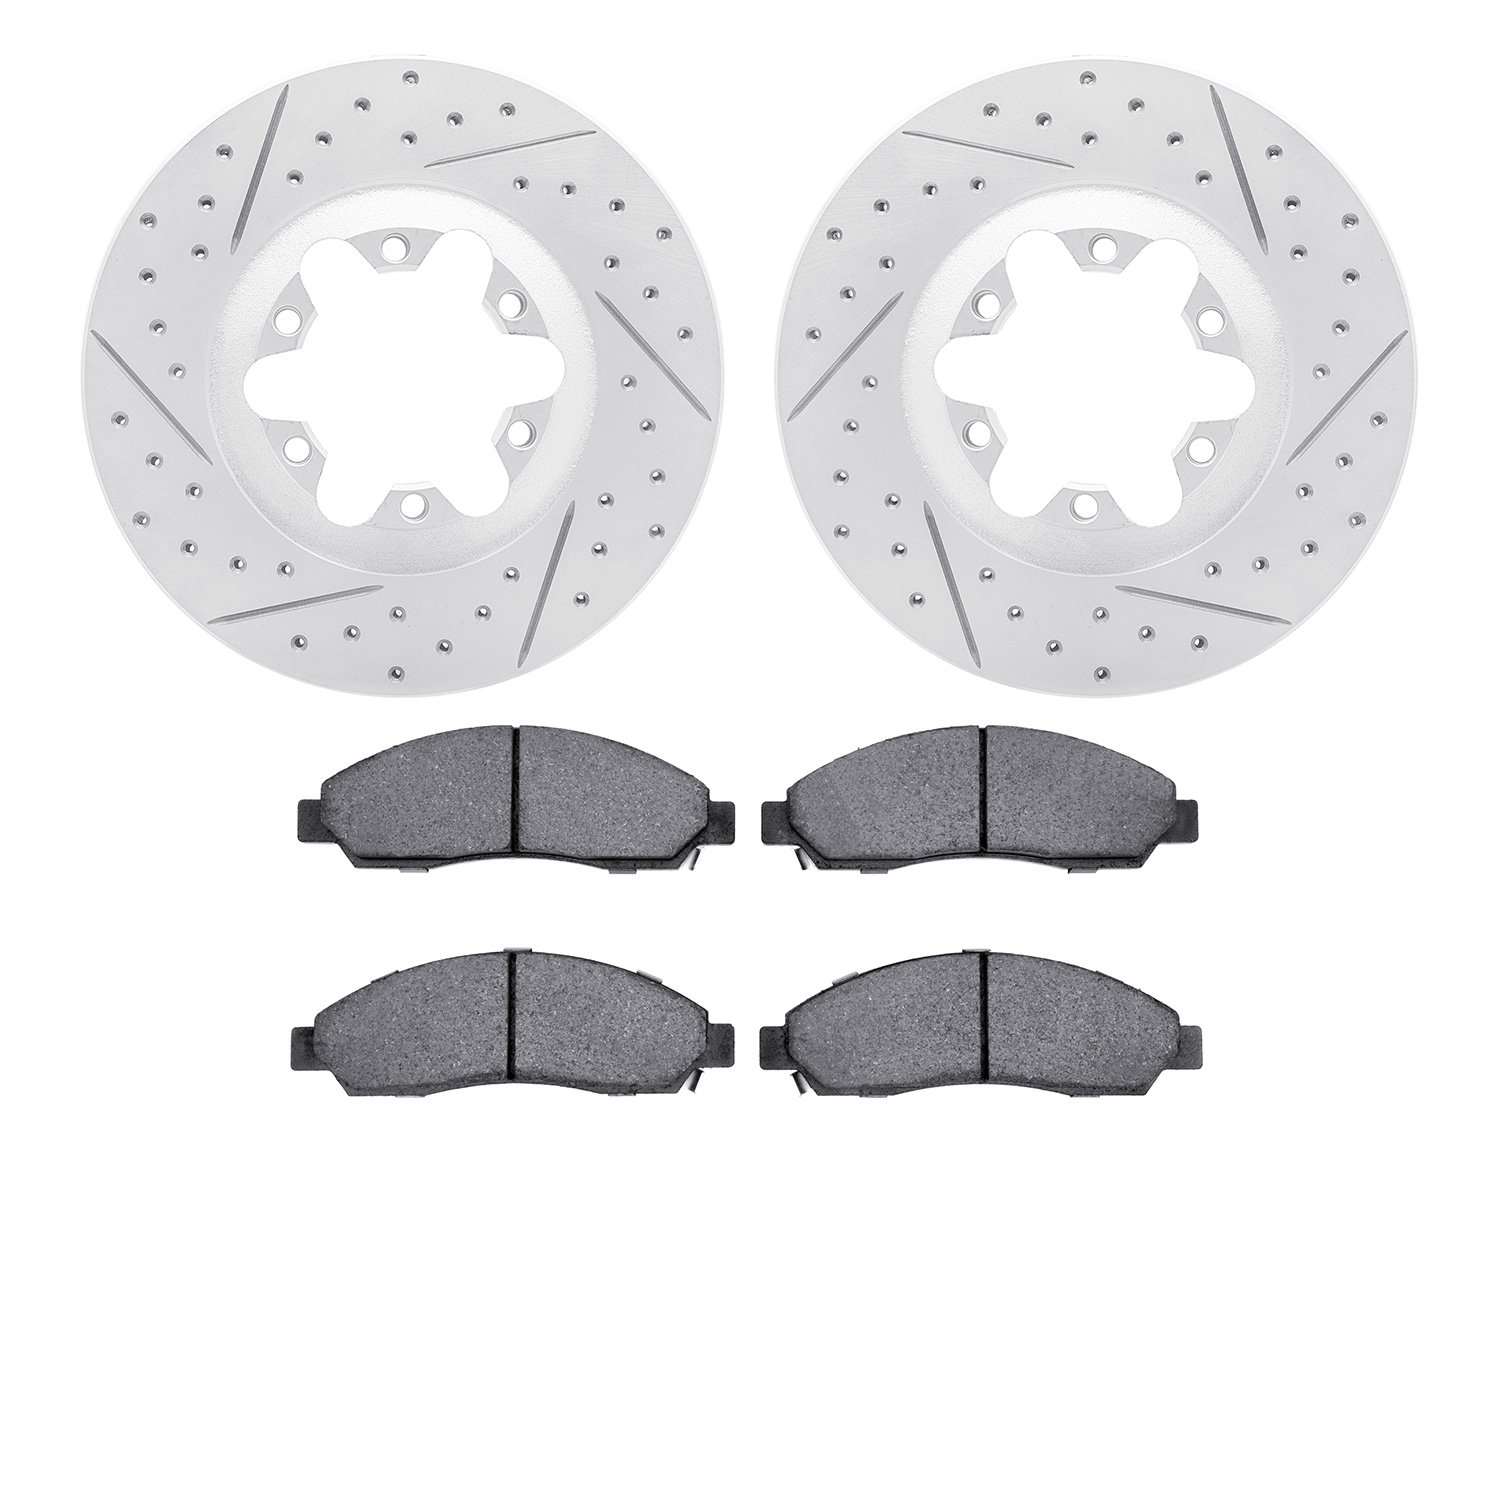 2502-48056 Geoperformance Drilled/Slotted Rotors w/5000 Advanced Brake Pads Kit, 2004-2008 GM, Position: Front